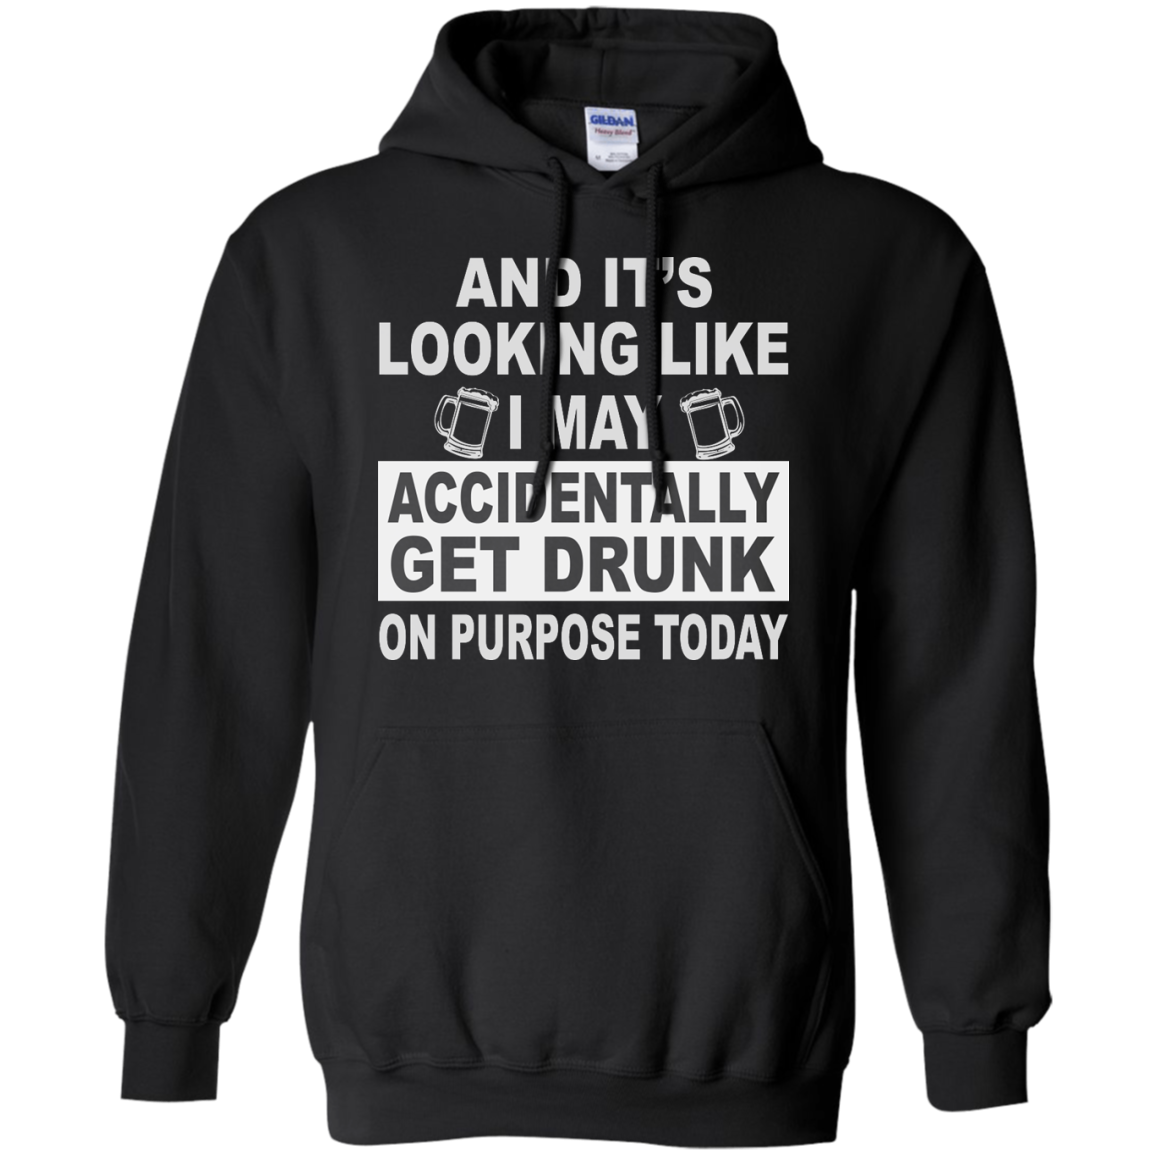 And it's looking like I may accidentally get drunk t-shirt, tank